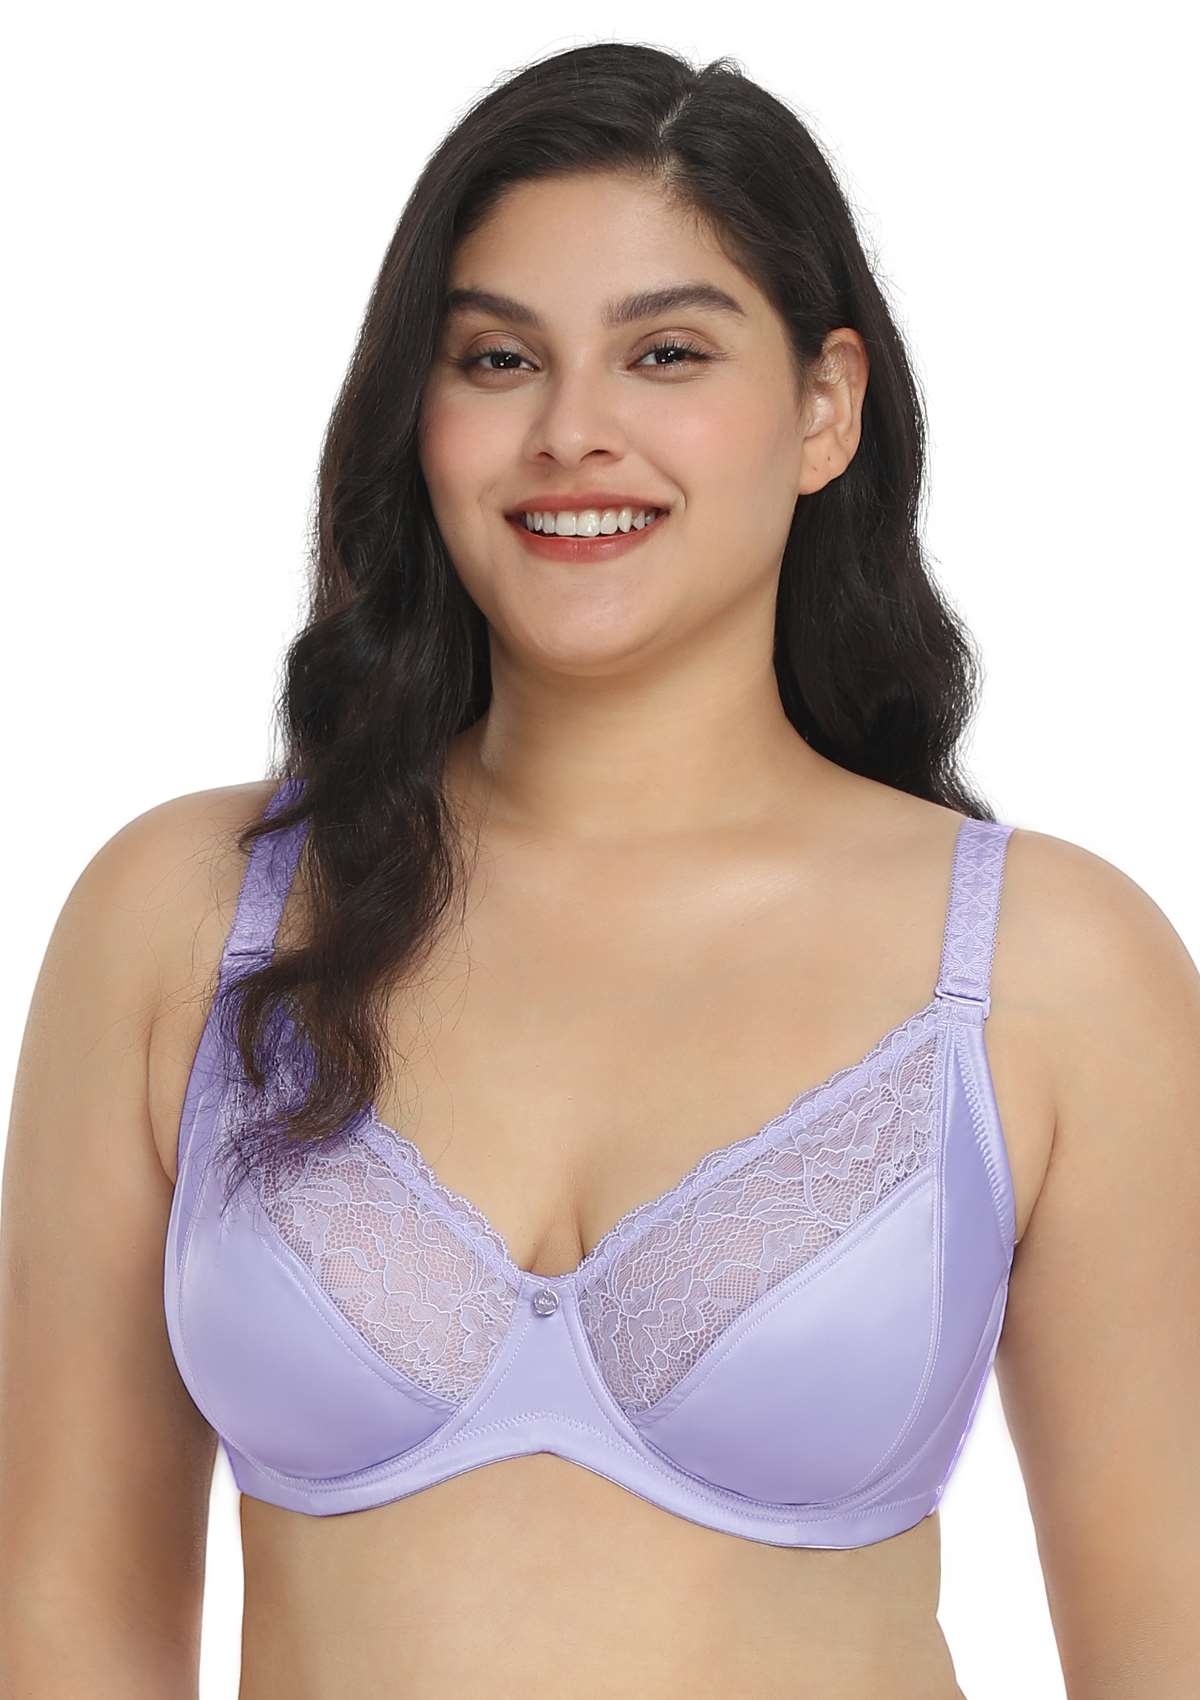 HSIA Foxy Satin Silky Full Coverage Underwire Bra With Floral Lace Trim - Champagne / 34 / C